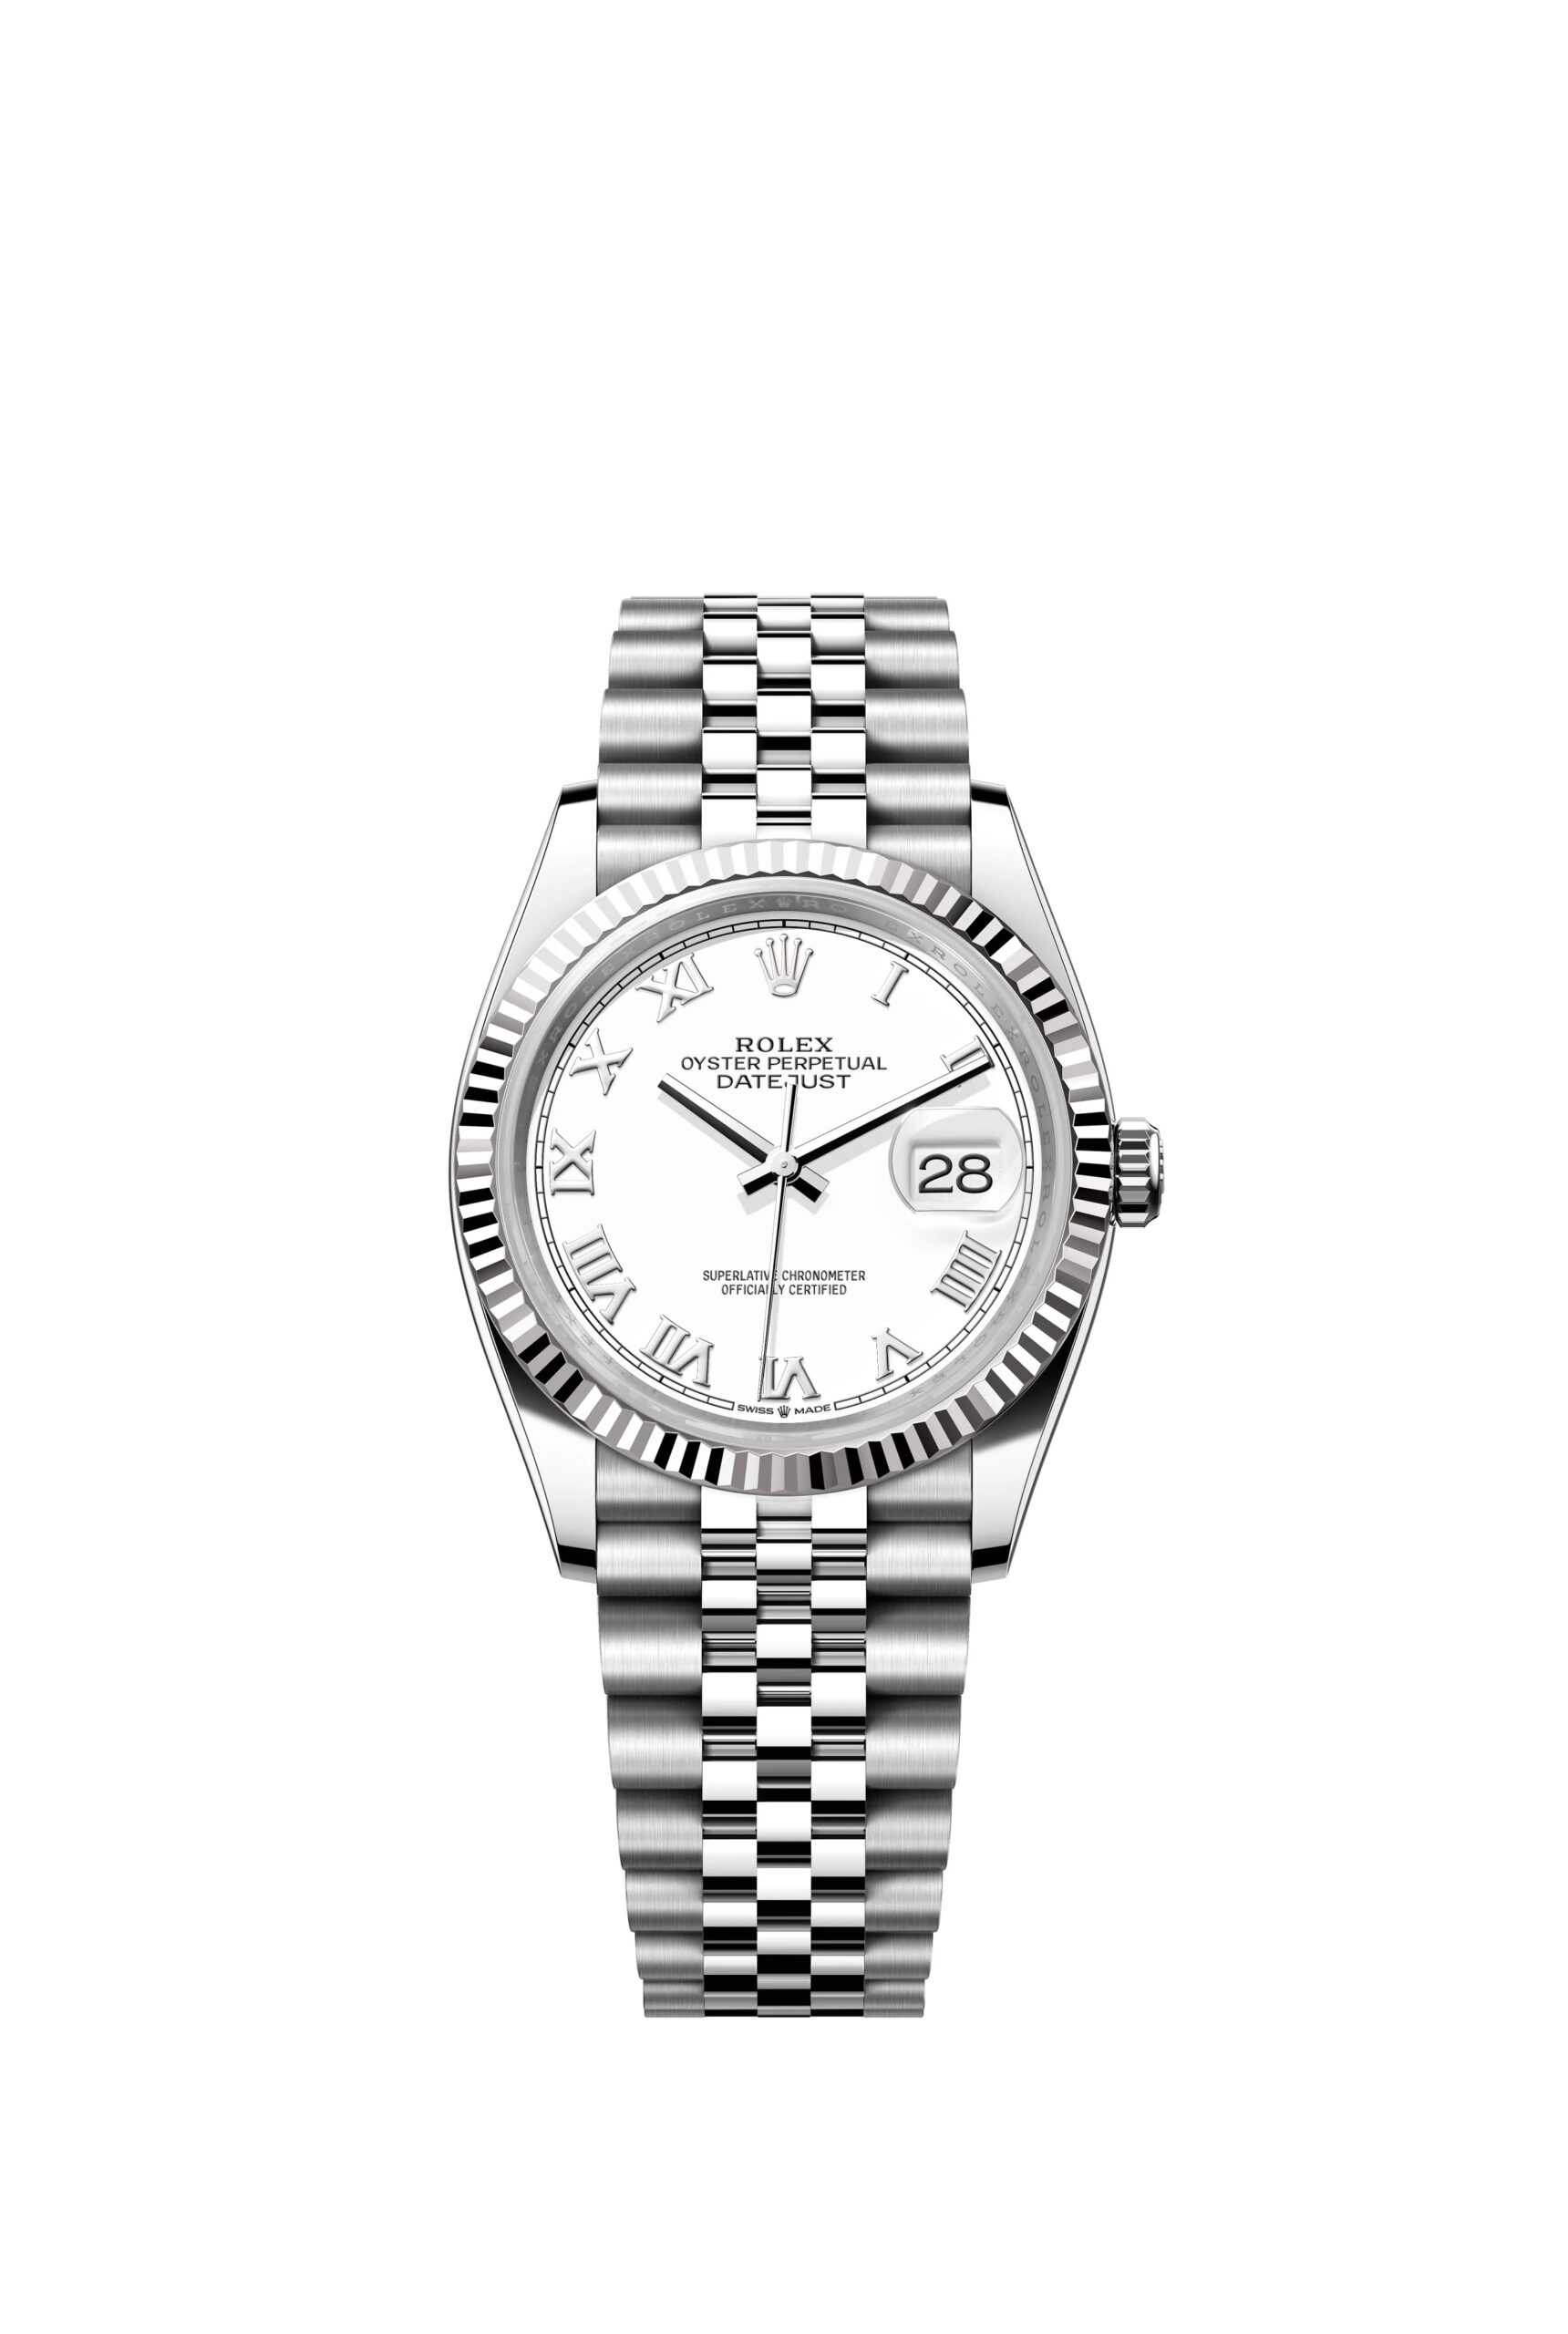 Rolex Datejust 36 Oyster, 36 mm, Oystersteel and white gold Reference 126234